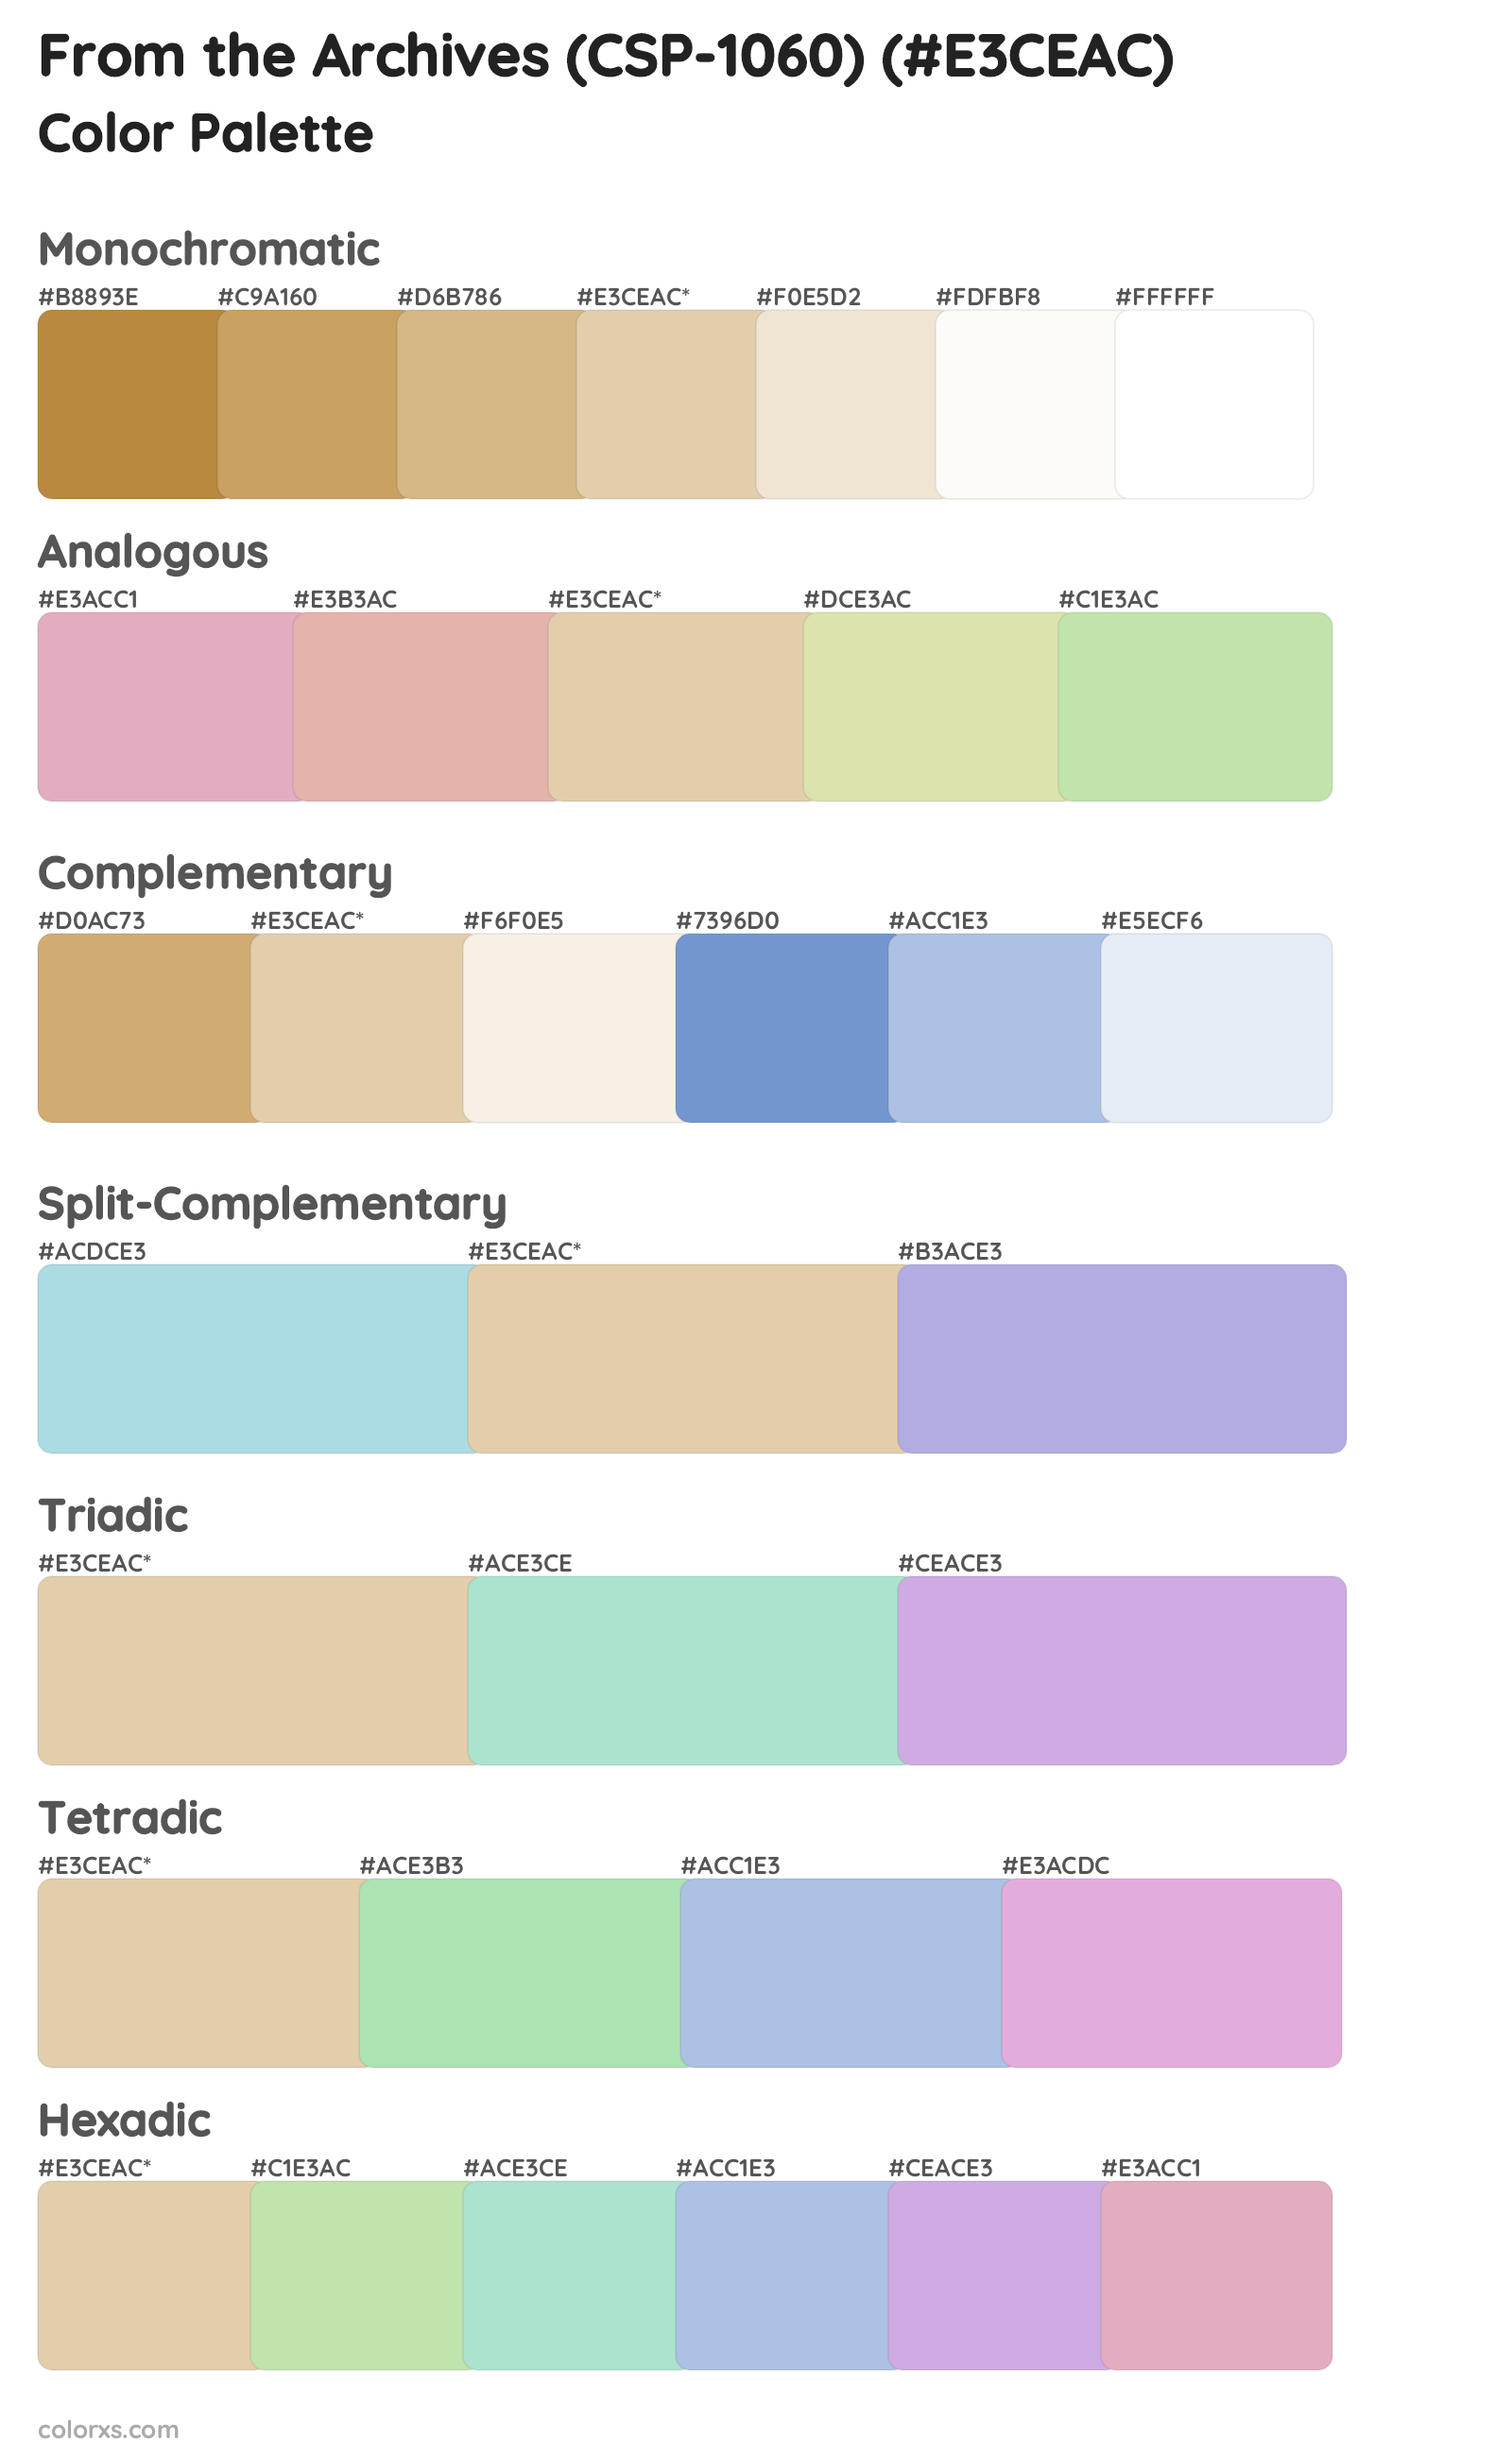 From the Archives (CSP-1060) Color Scheme Palettes